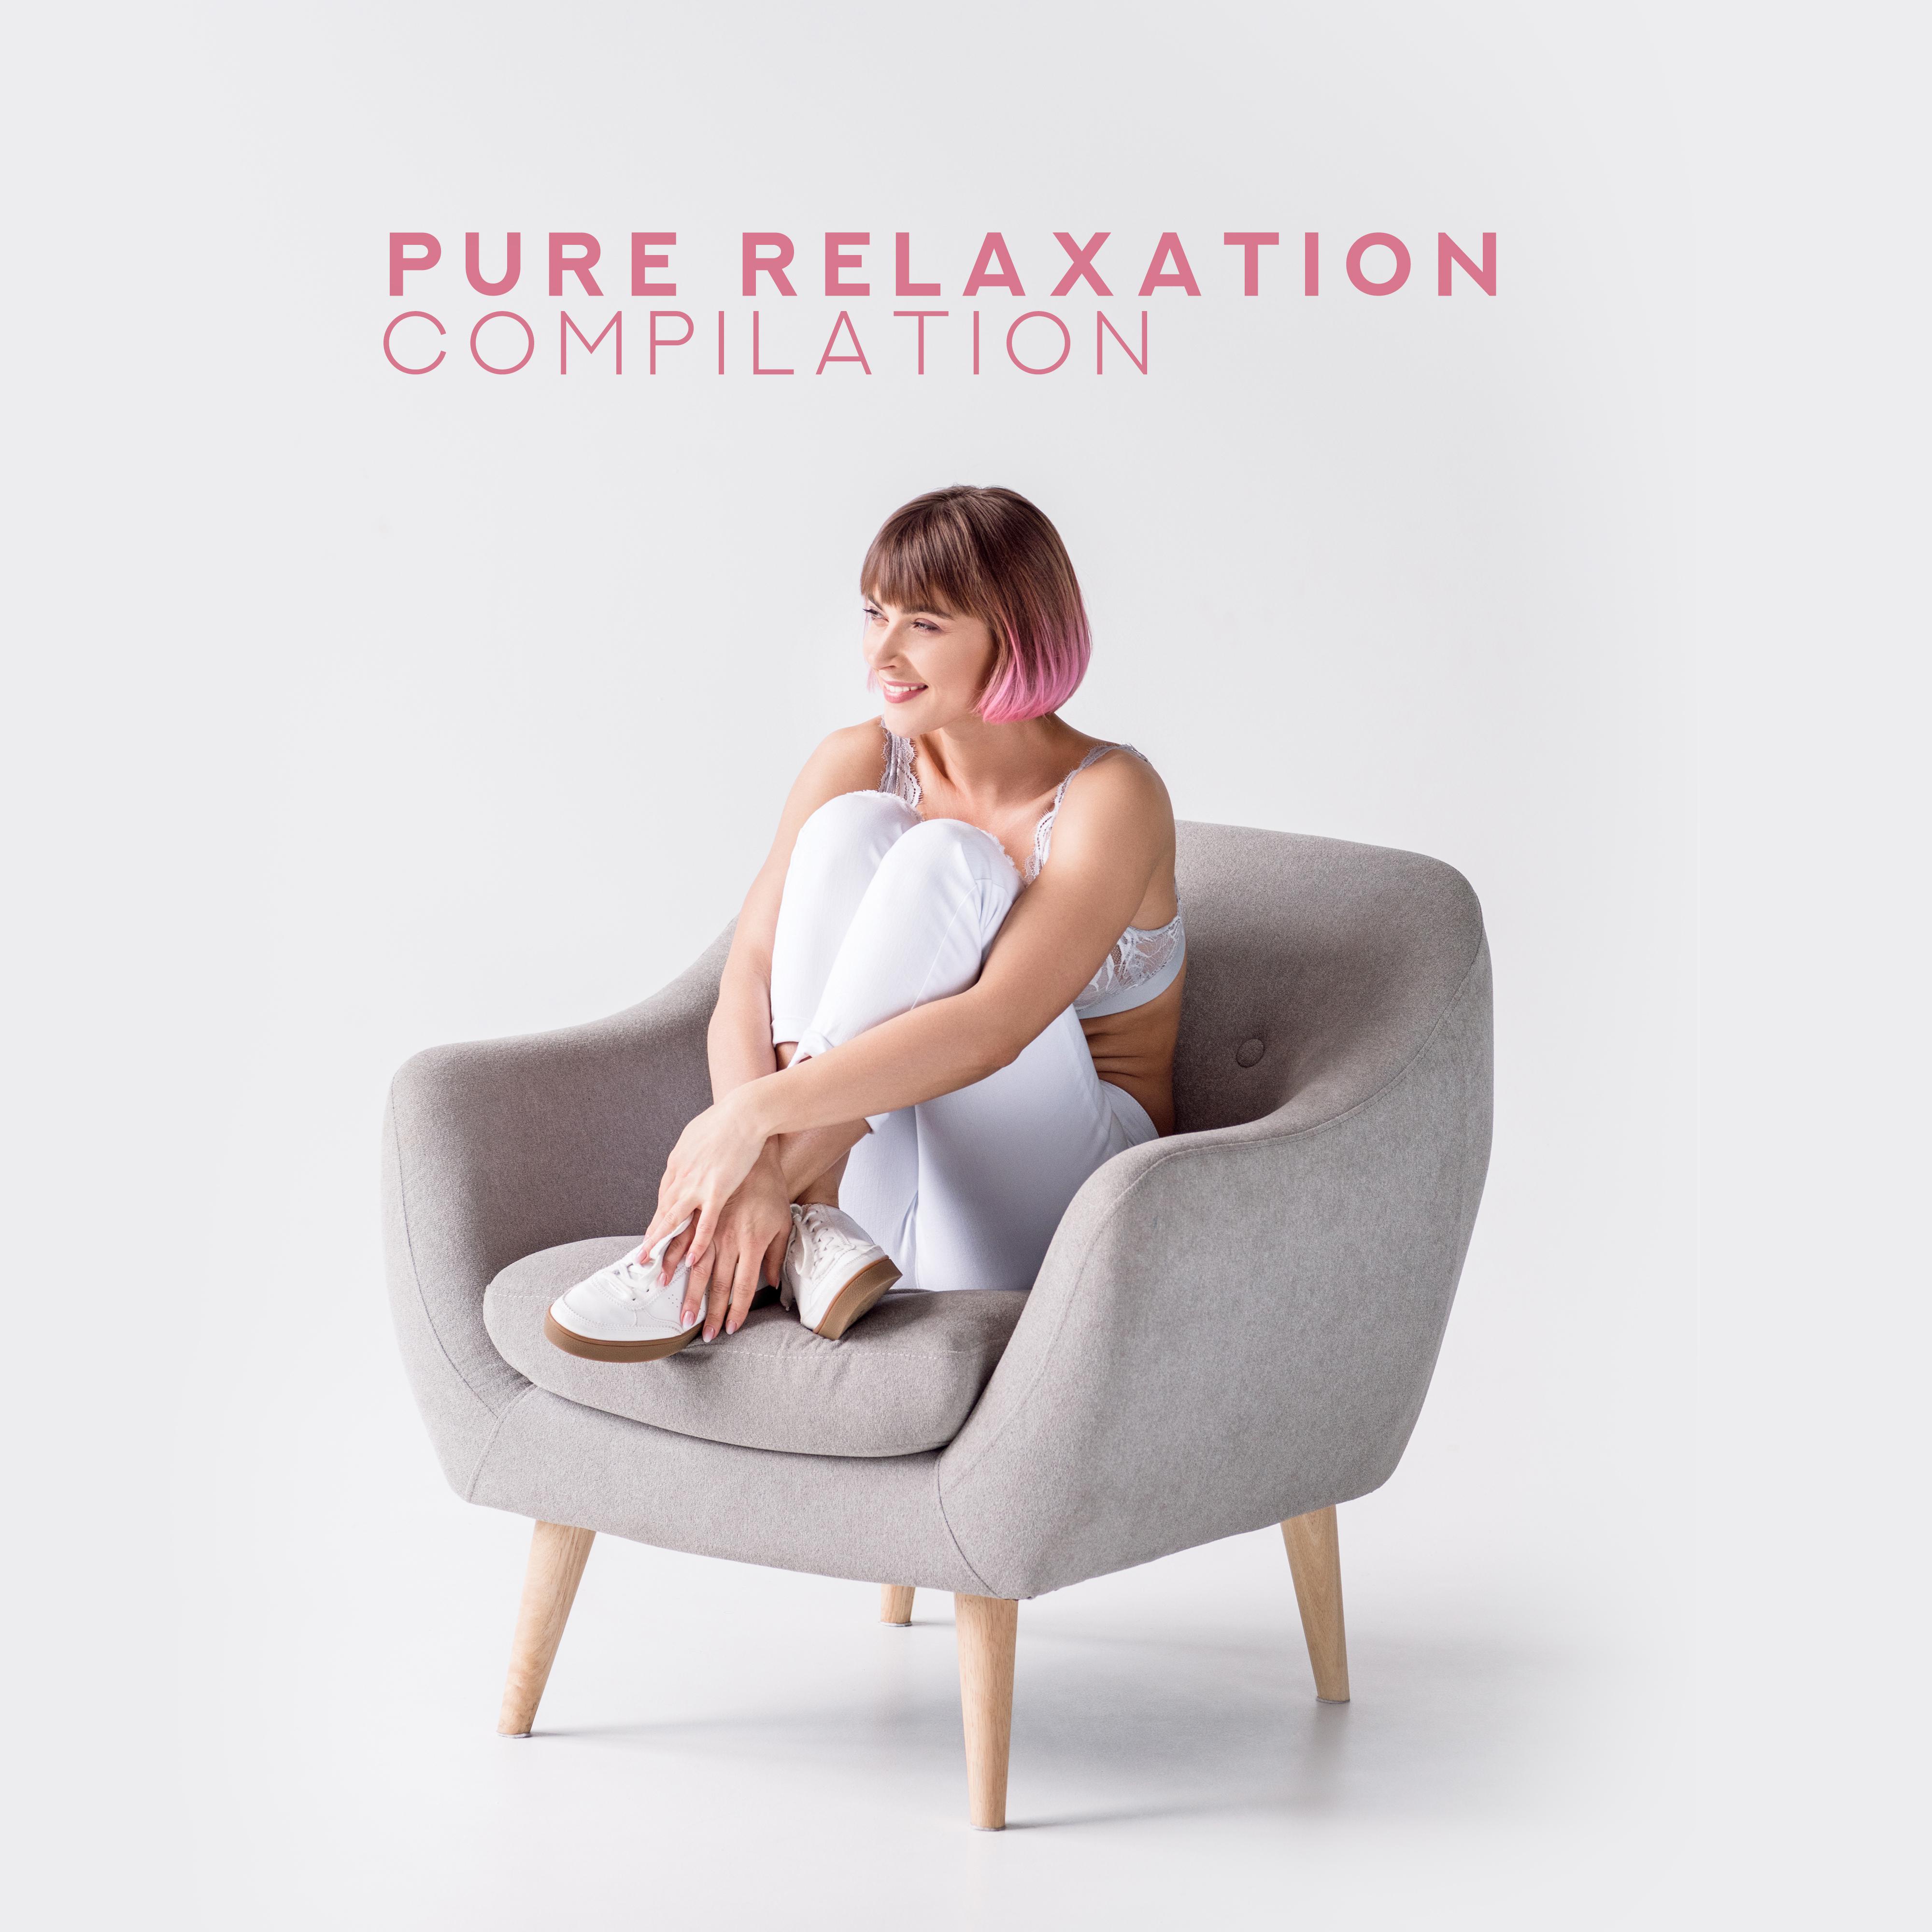 Pure Relaxation Compilation: 2019 New Age Nature Piano Music Composed for Total Relax, Destroy All Bad Thoughts, Stress Relief, Calming Down & Full Rest